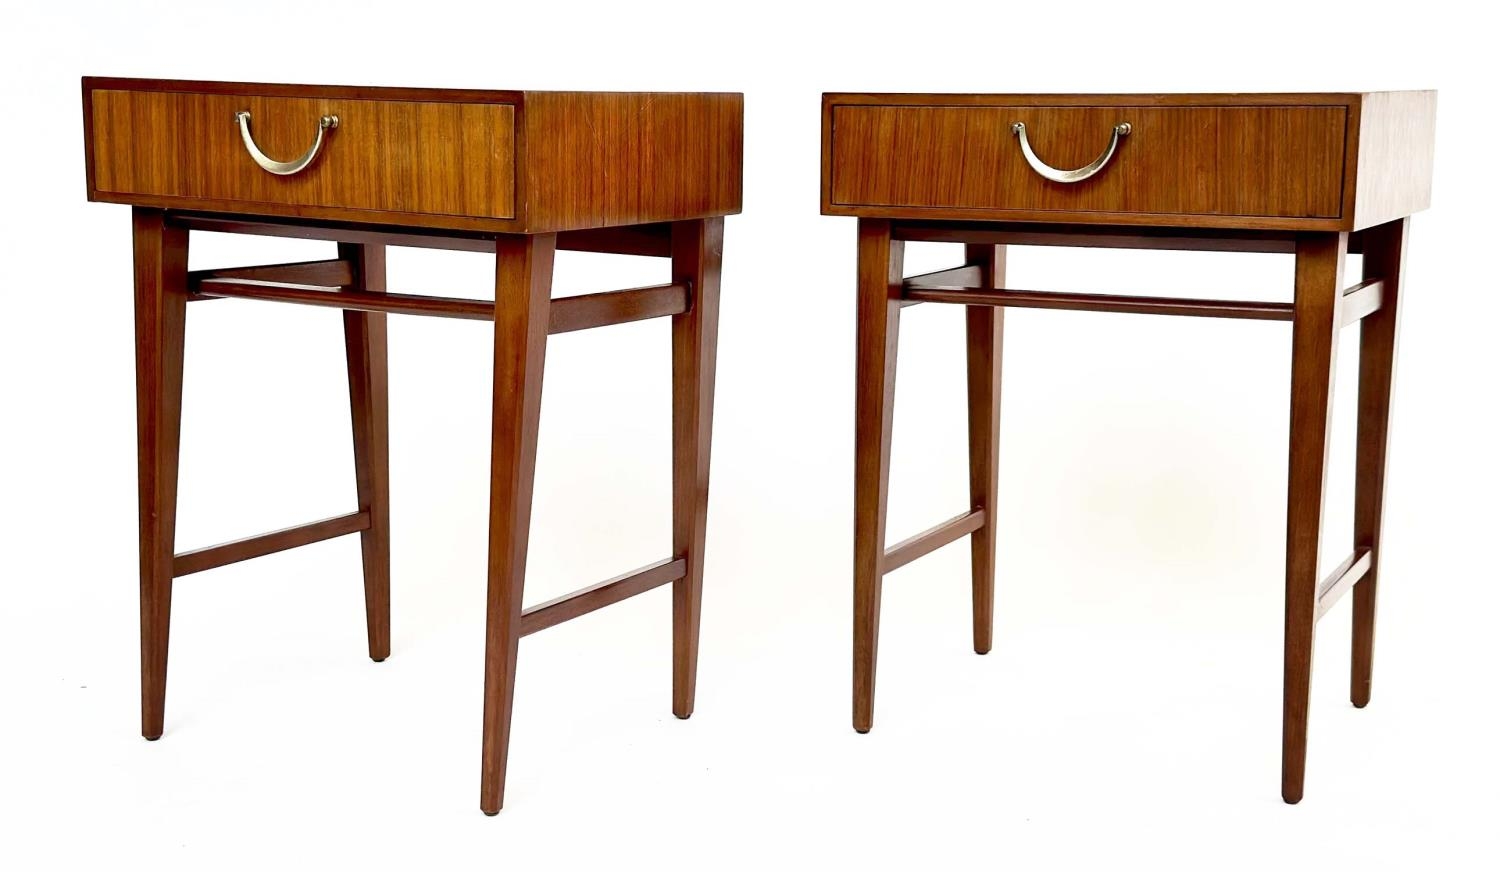 MEREDEW LAMP TABLES, a pair, 1970s Afromosia and teak, each with frieze drawer and stretchered - Image 3 of 9